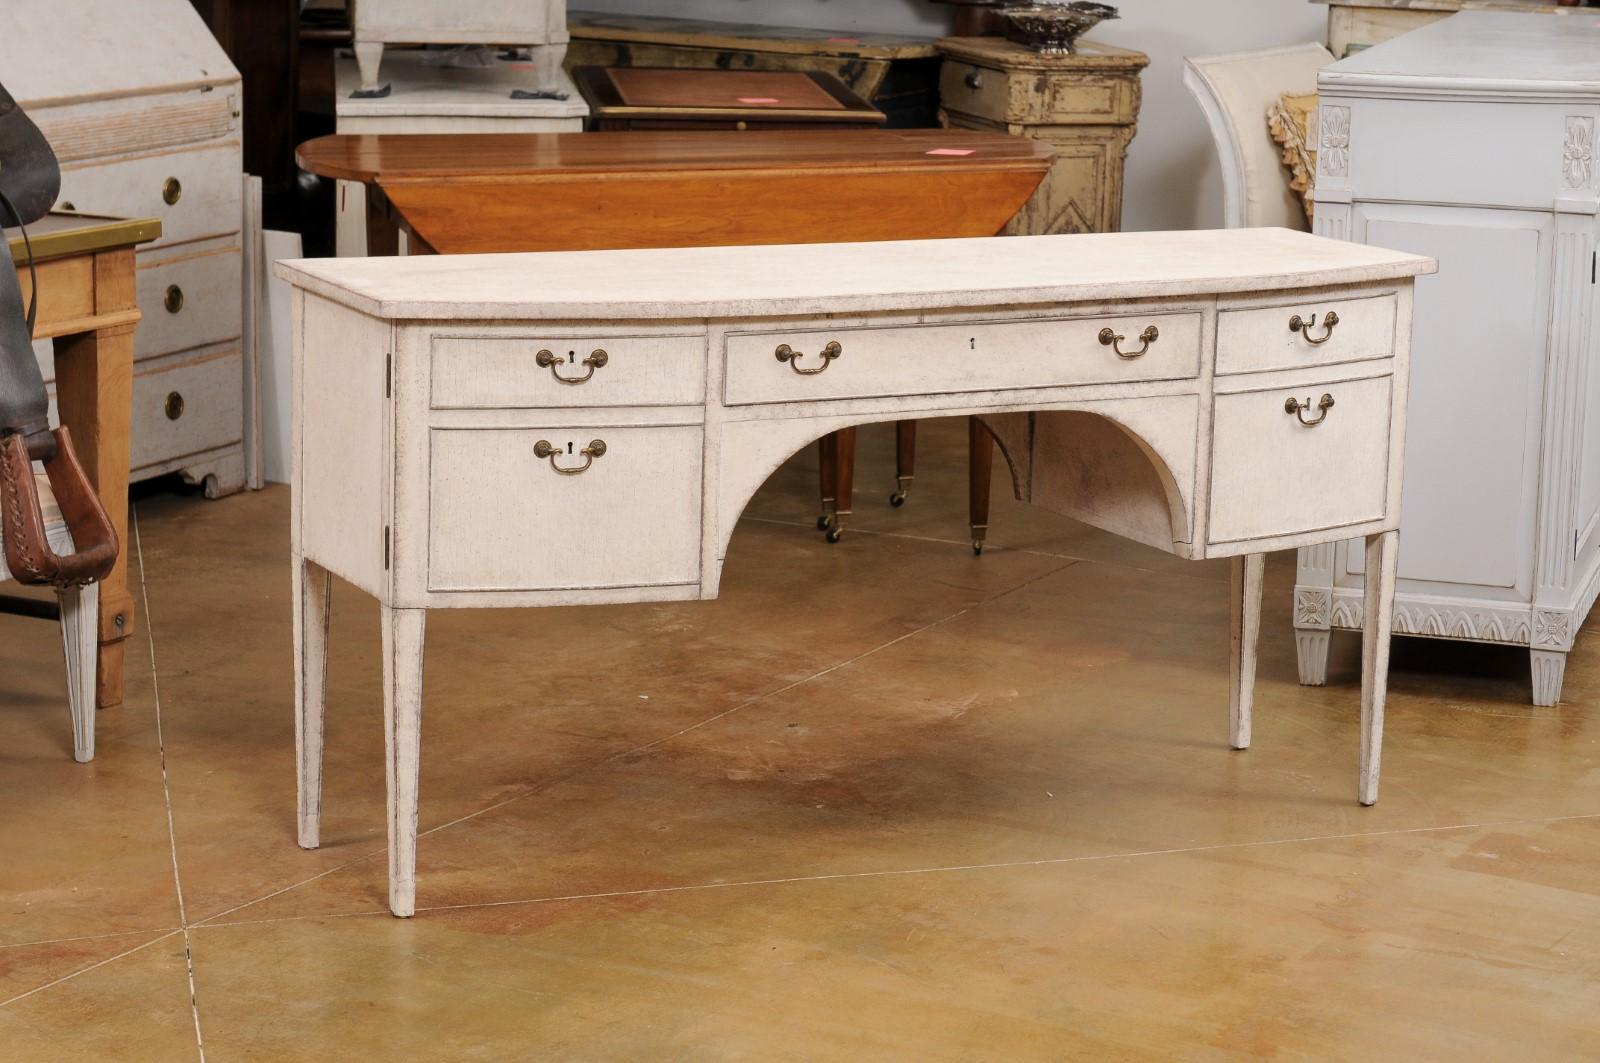 A Swedish Gustavian style bow front painted wood sideboard or desk from the early 20th century, with single drawer, two doors and tapered legs. Created in Sweden during the Turn of the Century which saw the transition between the 19th to the 20th,